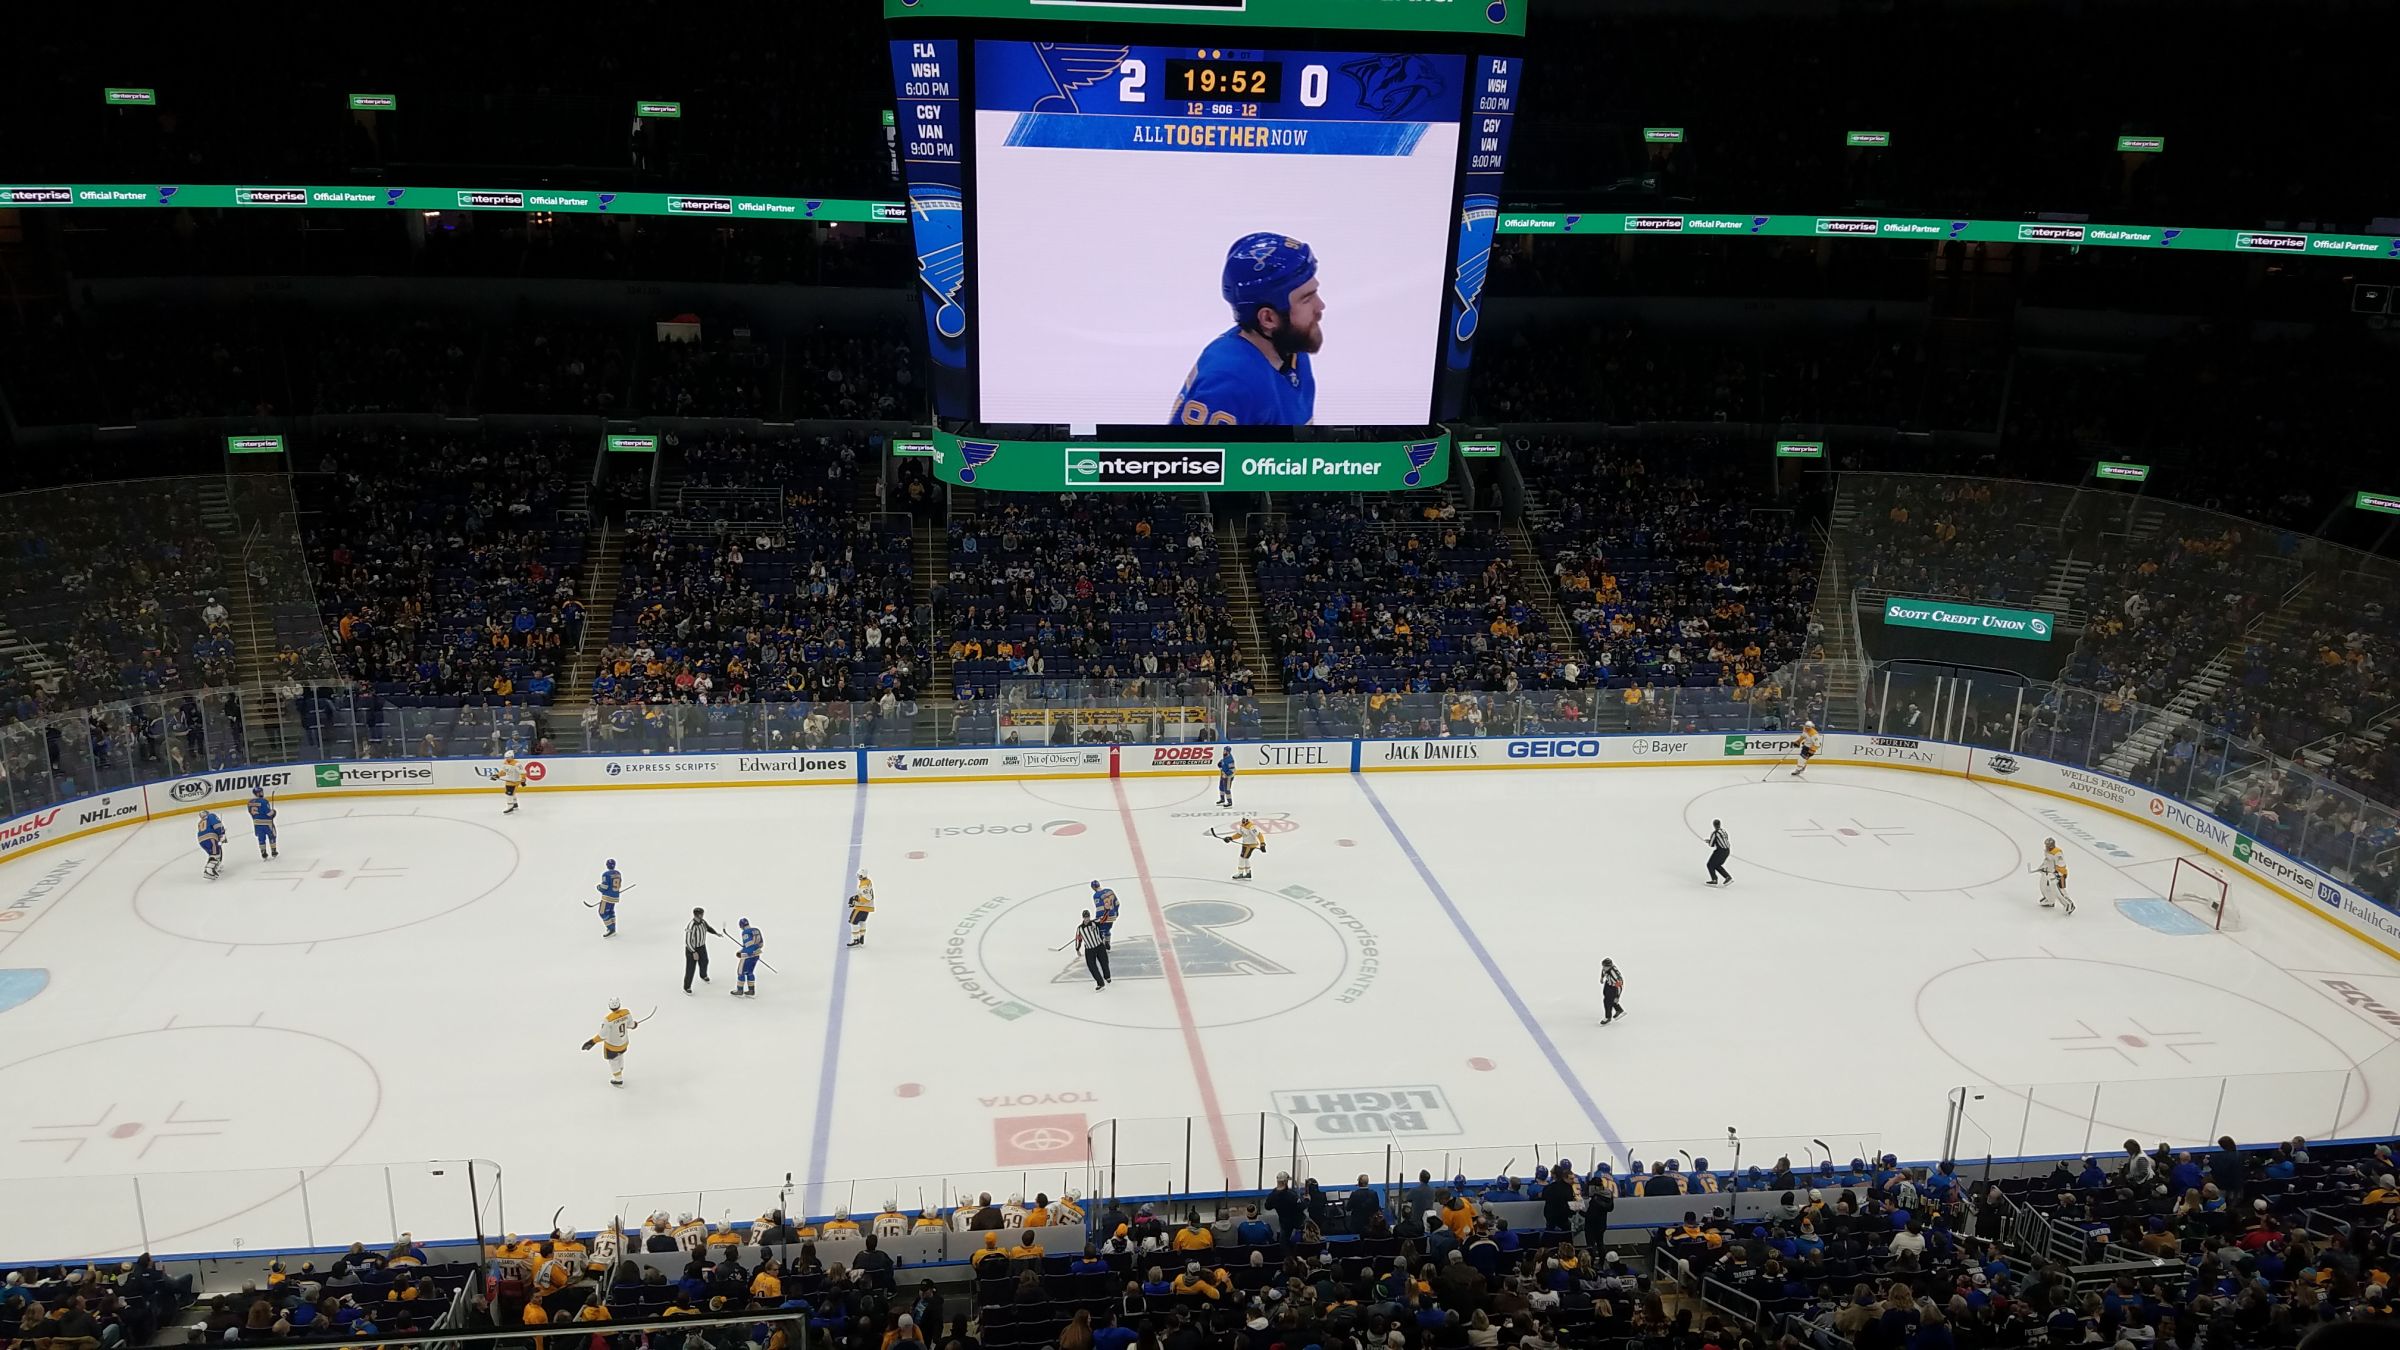 section 303, row c seat view  for hockey - enterprise center